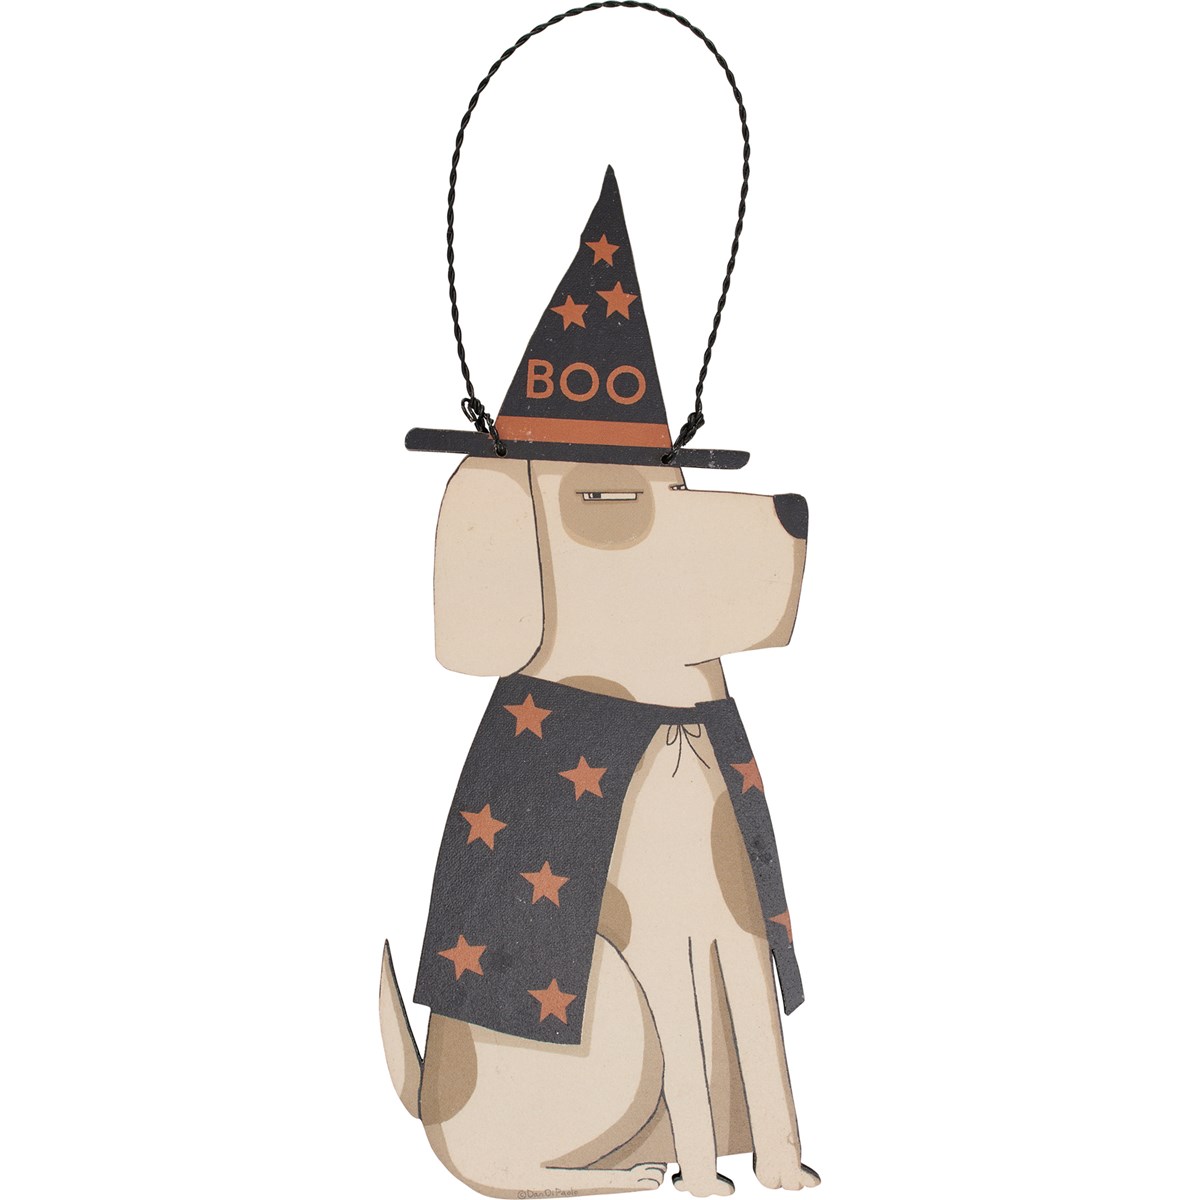 Boo Dog Hanging Decor - Wood, Paper, Wire